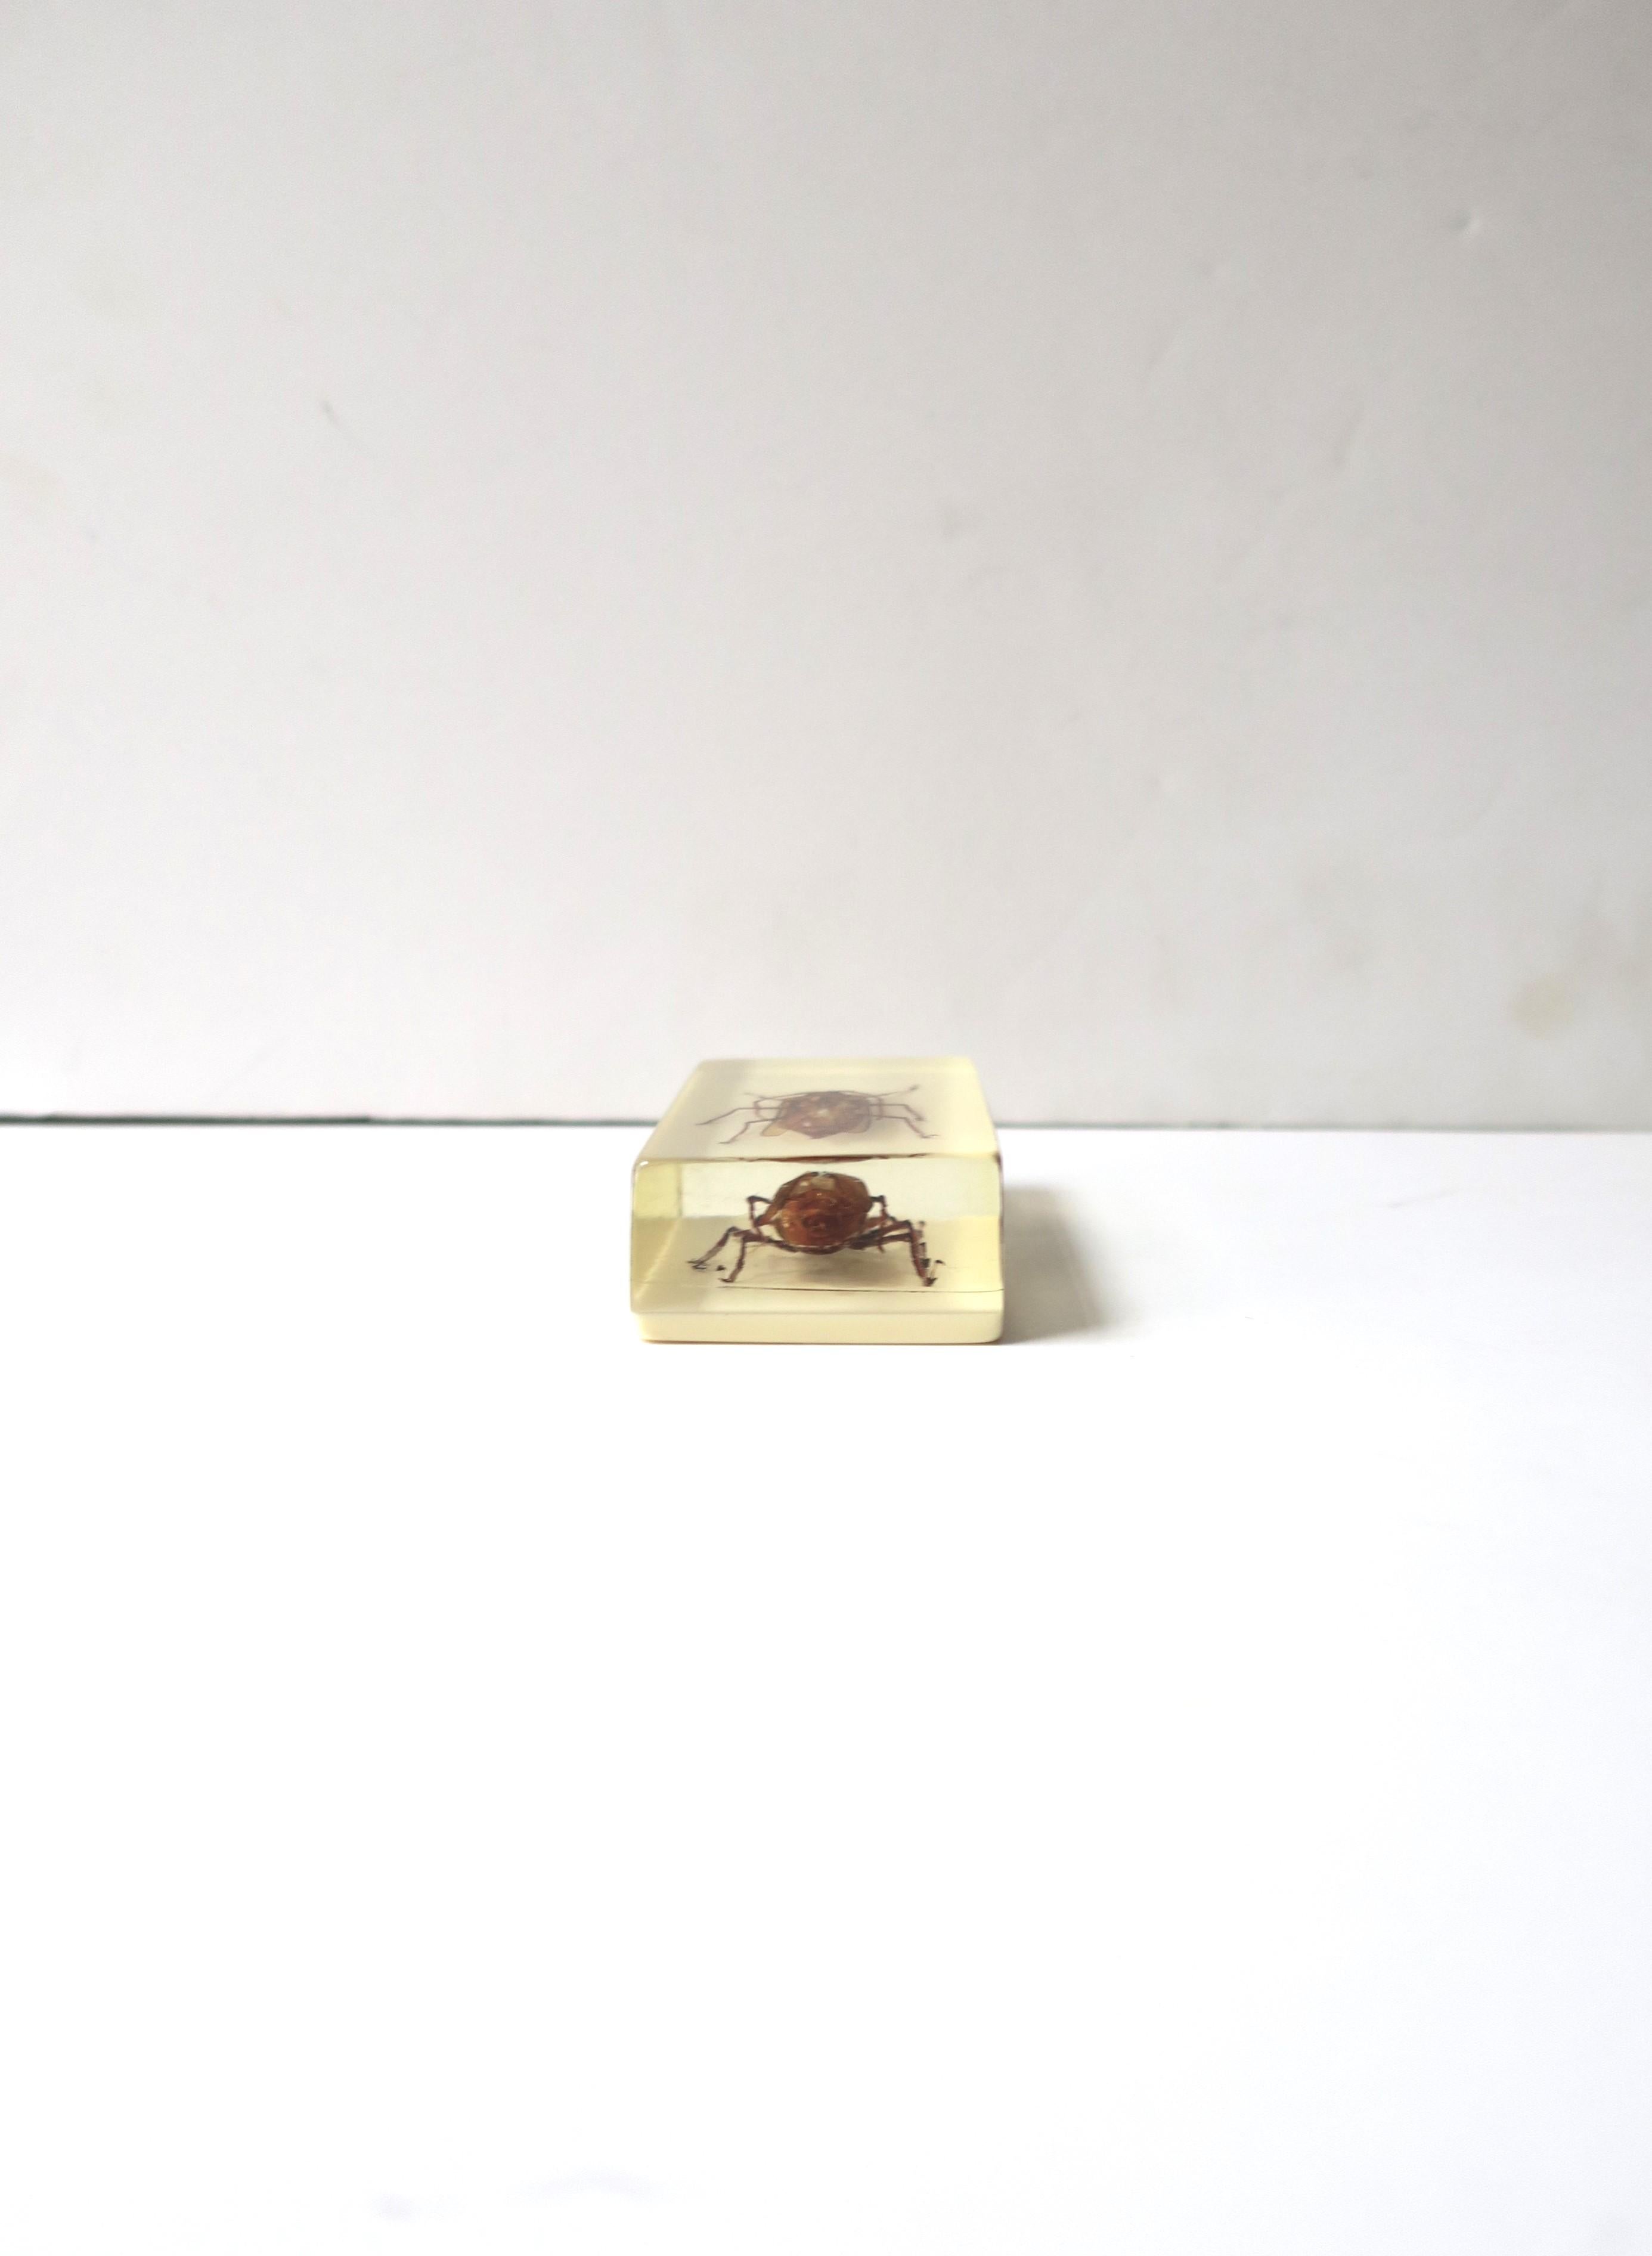 Lucite Encased Insect Bug Decorative Object or Paperweight For Sale 3